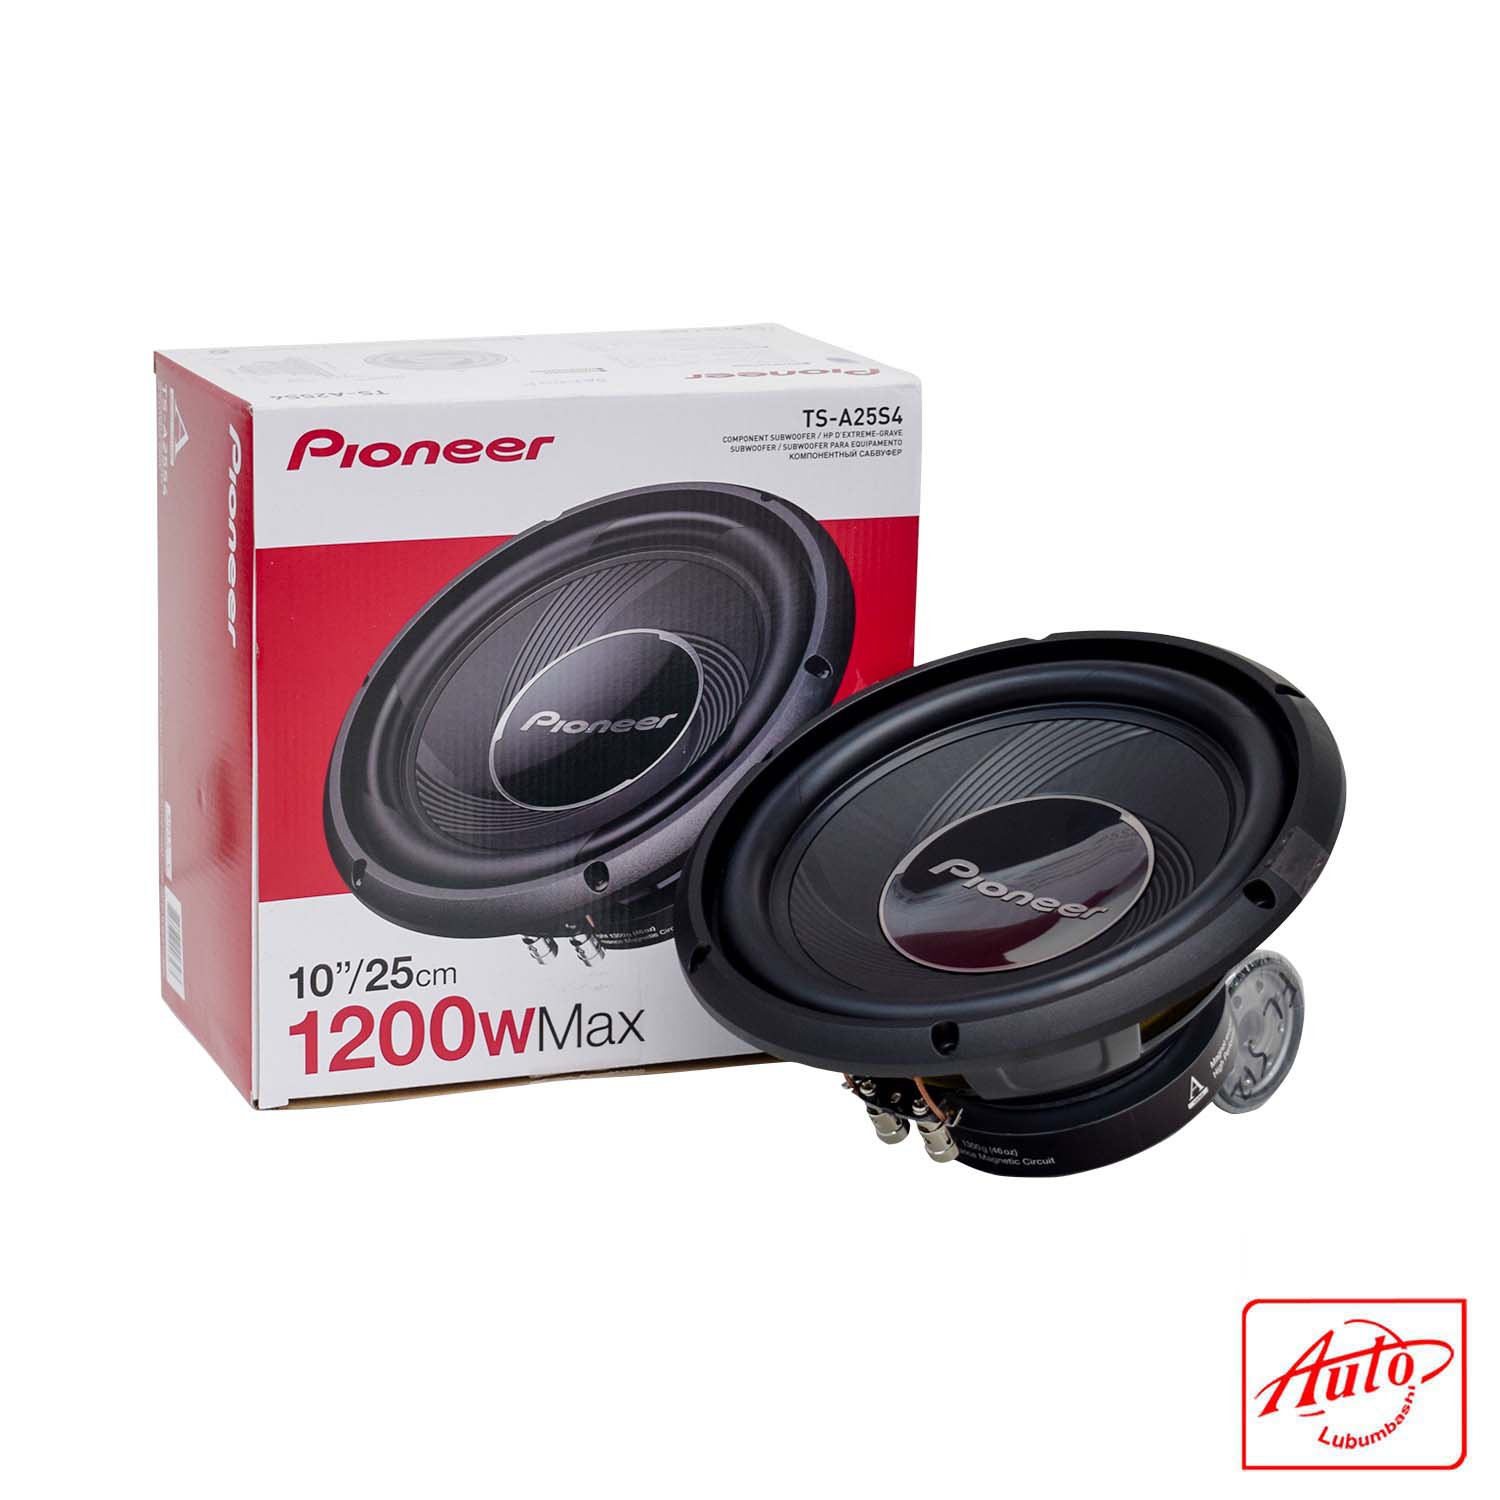 25 CM / 10 A-SERIES COMPONENT SUBWOOFER, 1200 W MAX. 350 W - PIONEER